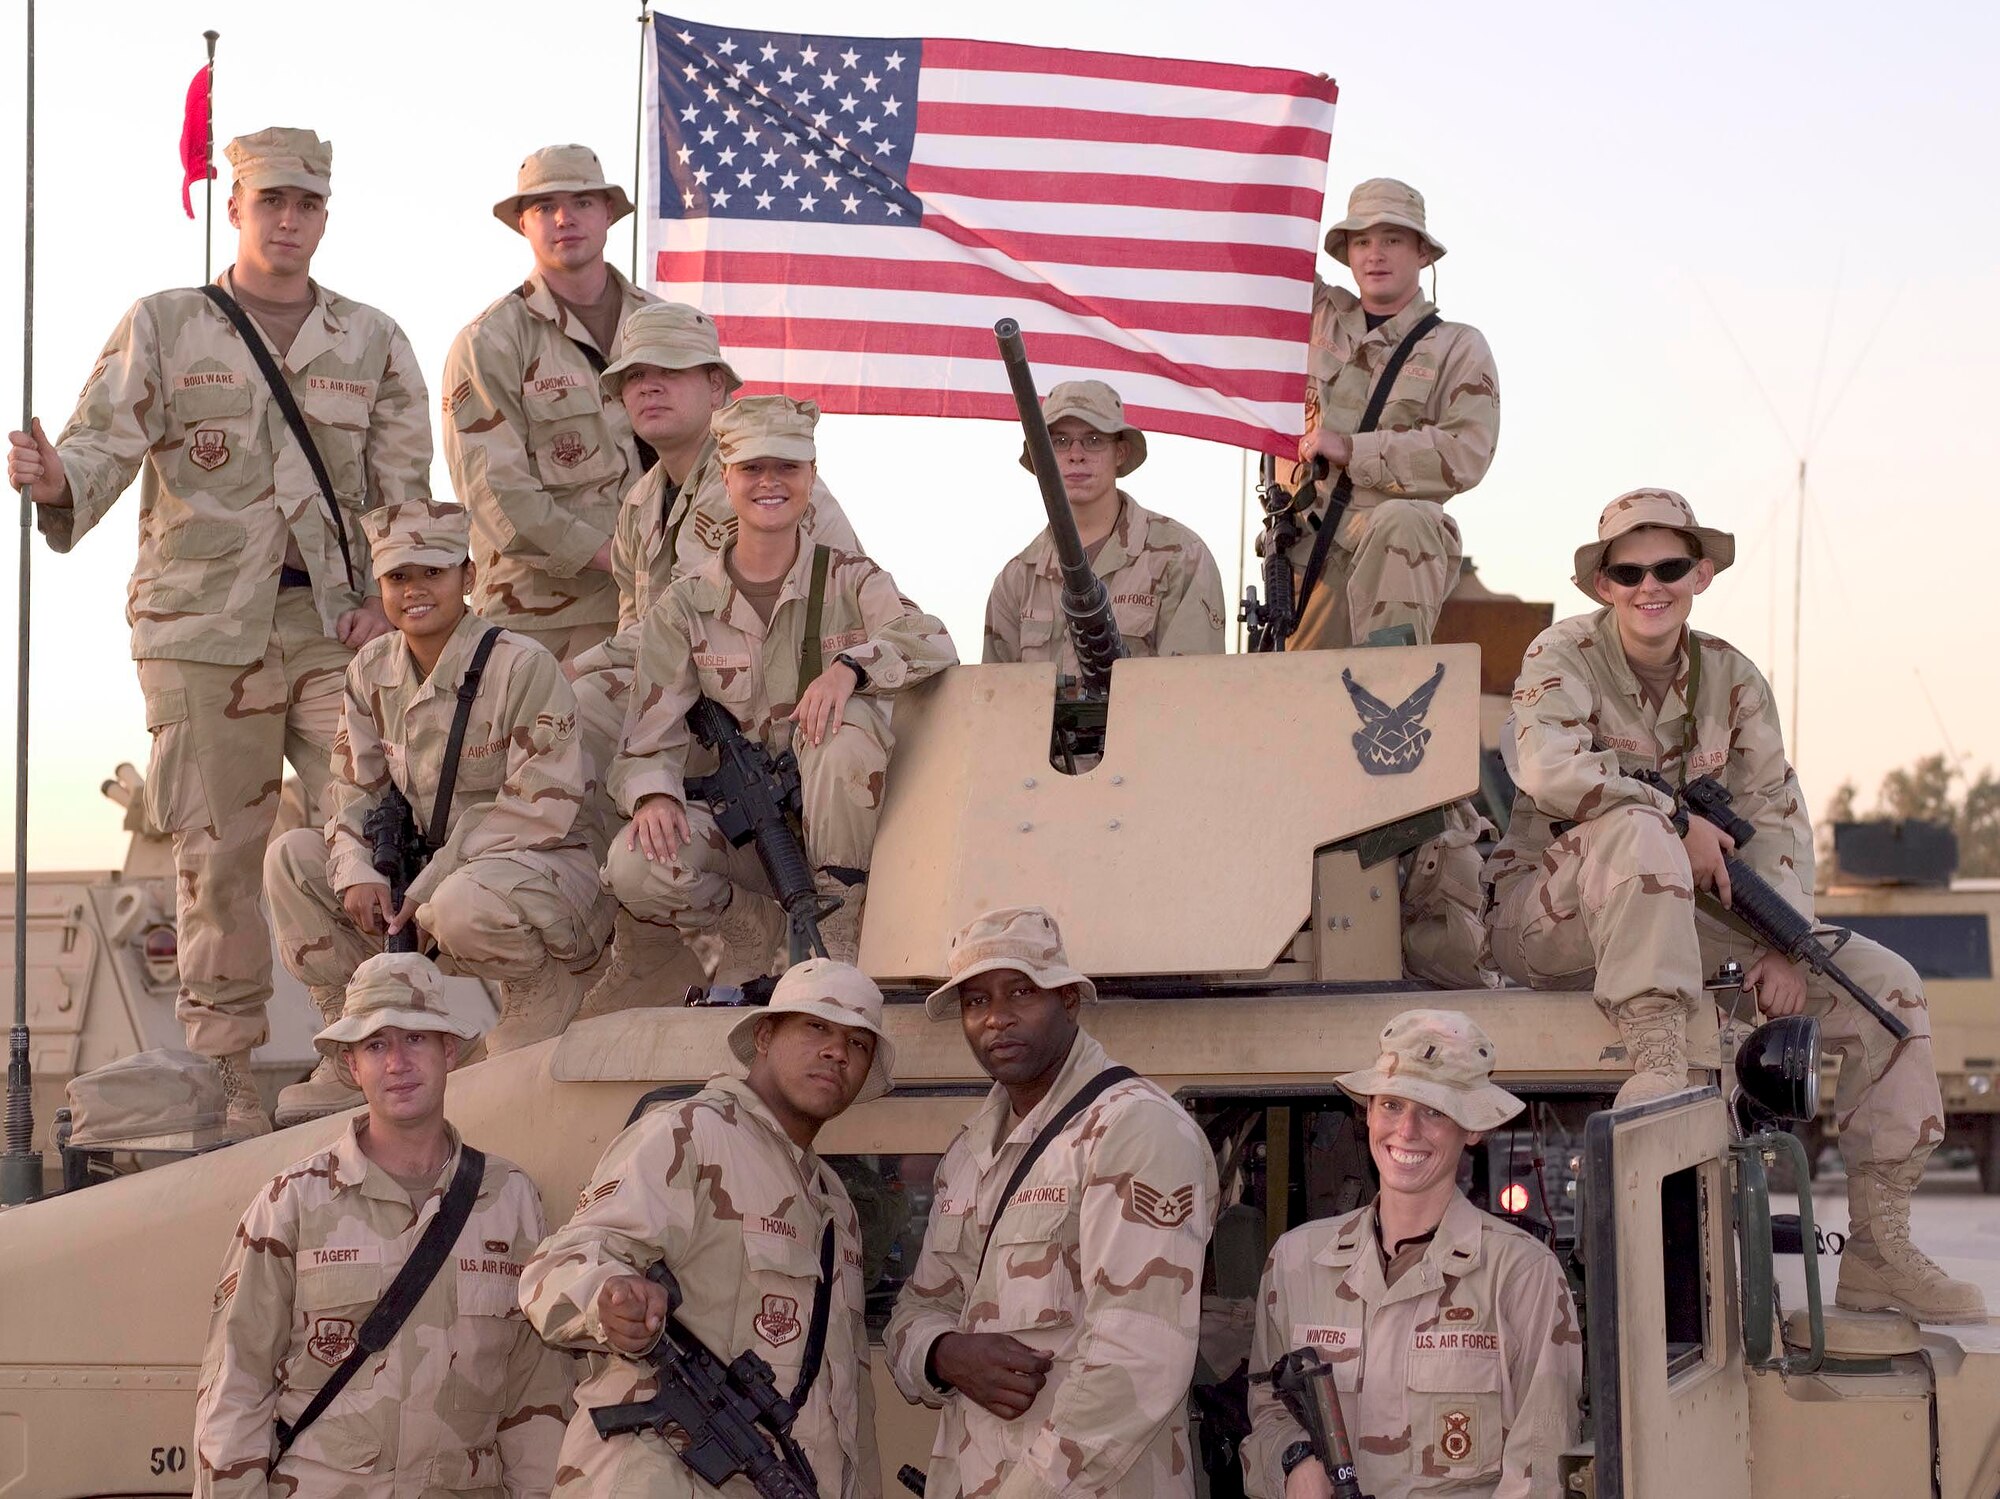 U.S. Airmen assigned to gun truck company Detachment 2632, Alpha Flight, poses for a group photo during a deployment in 2005, Balad Air Base, Iraq. Alpha Flight provided armed escorts for cargo haulers. (courtesy photo)  